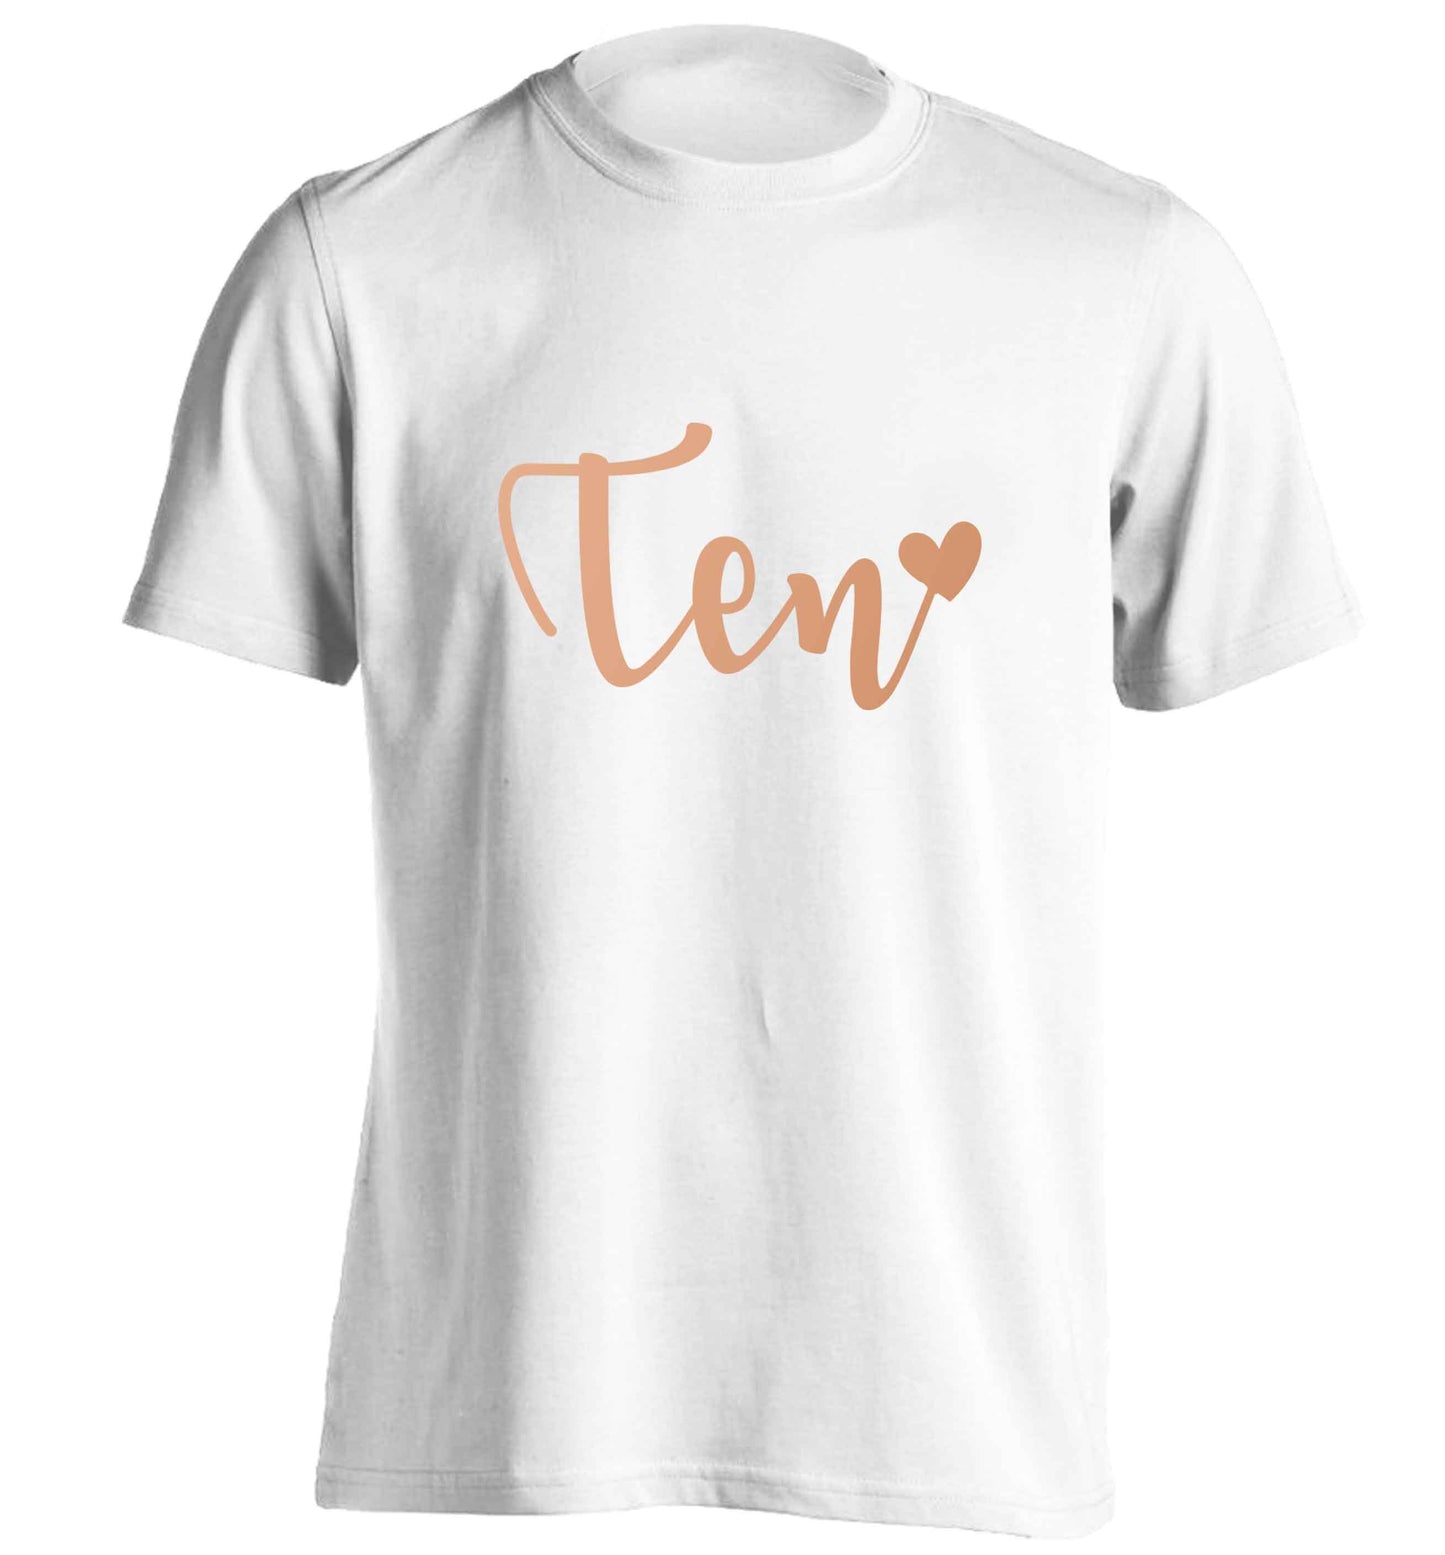 Rose gold eleven adults unisex white Tshirt 2XL